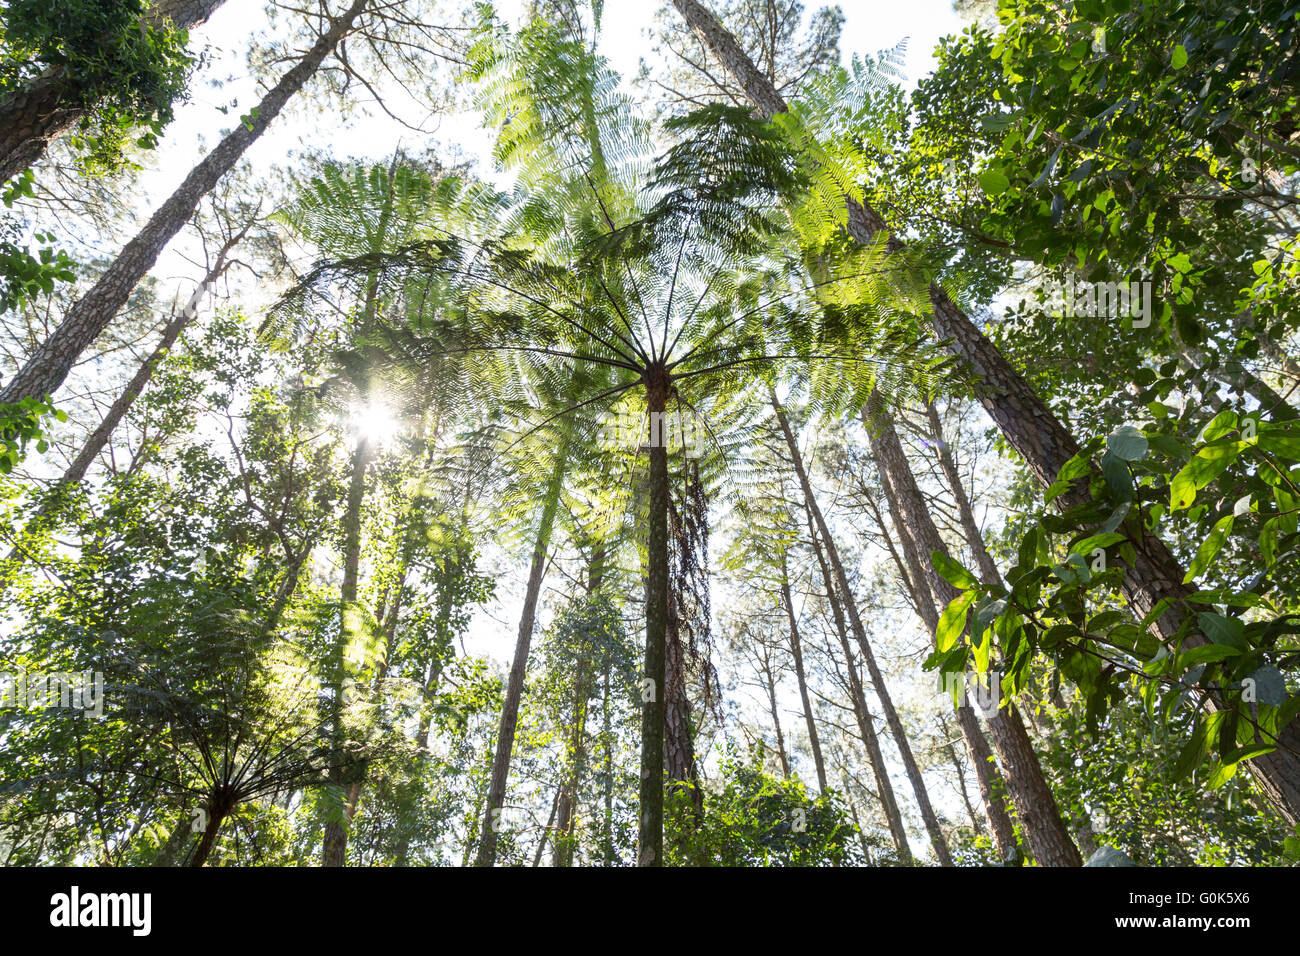 Sao Paulo, Brazil. 1st May, 2016. Xaxim or samambaiaçu (Dicksonia sellowiana) an arborescent fern is seen during this sunny day in Cantareira State Park (Portuguese: Parque Estadual da Cantareira) in Sao Paulo, Brazil. Credit:  Andre M. Chang/ARDUOPRESS/Alamy Live News Stock Photo